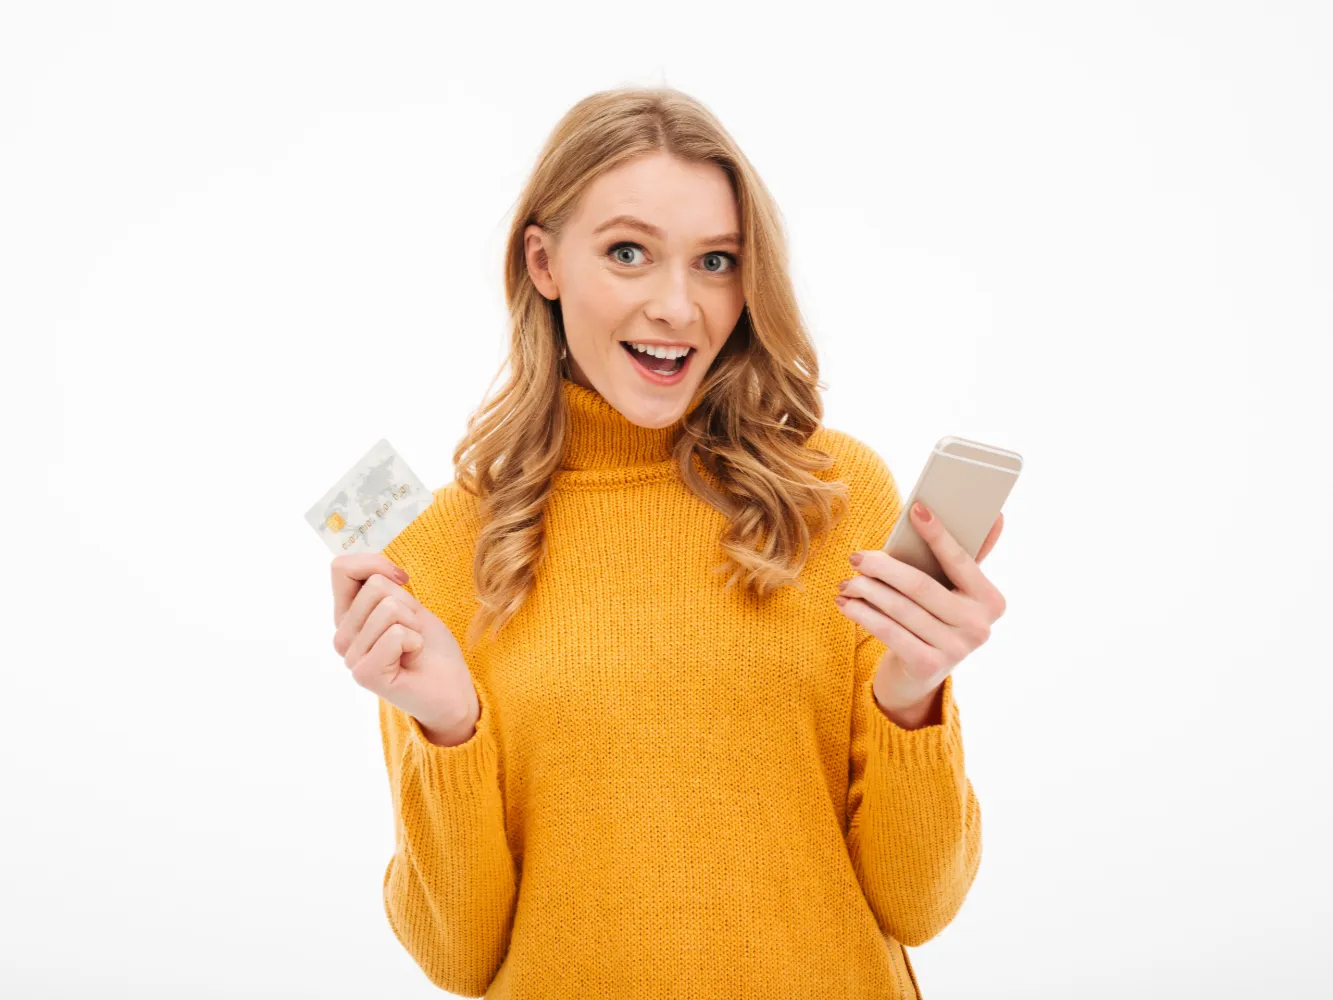 smiling-young-woman-holding-mobile-phone-credit-card